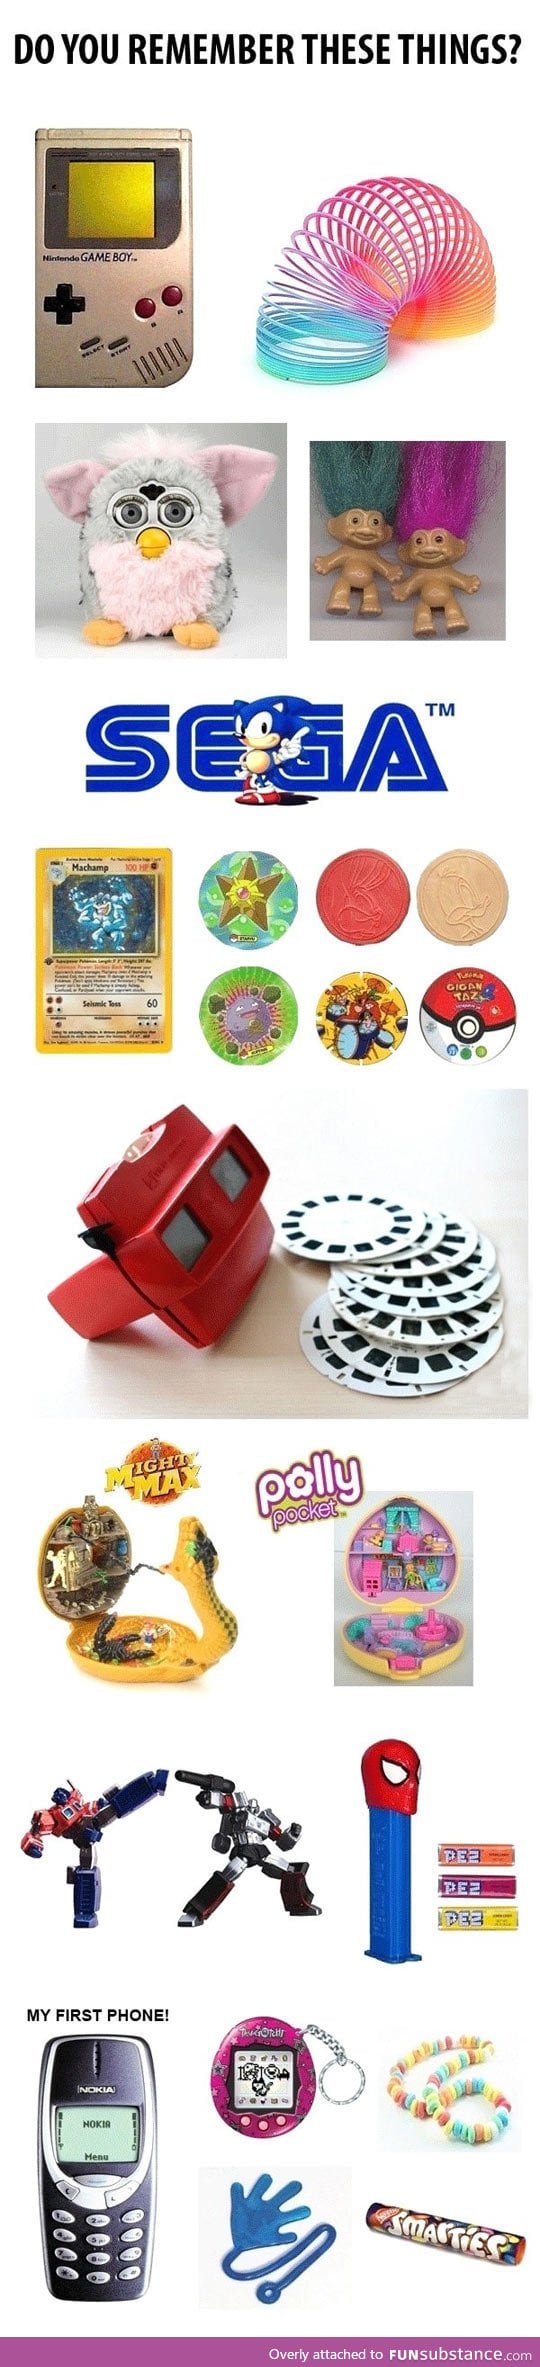 Do you remember these